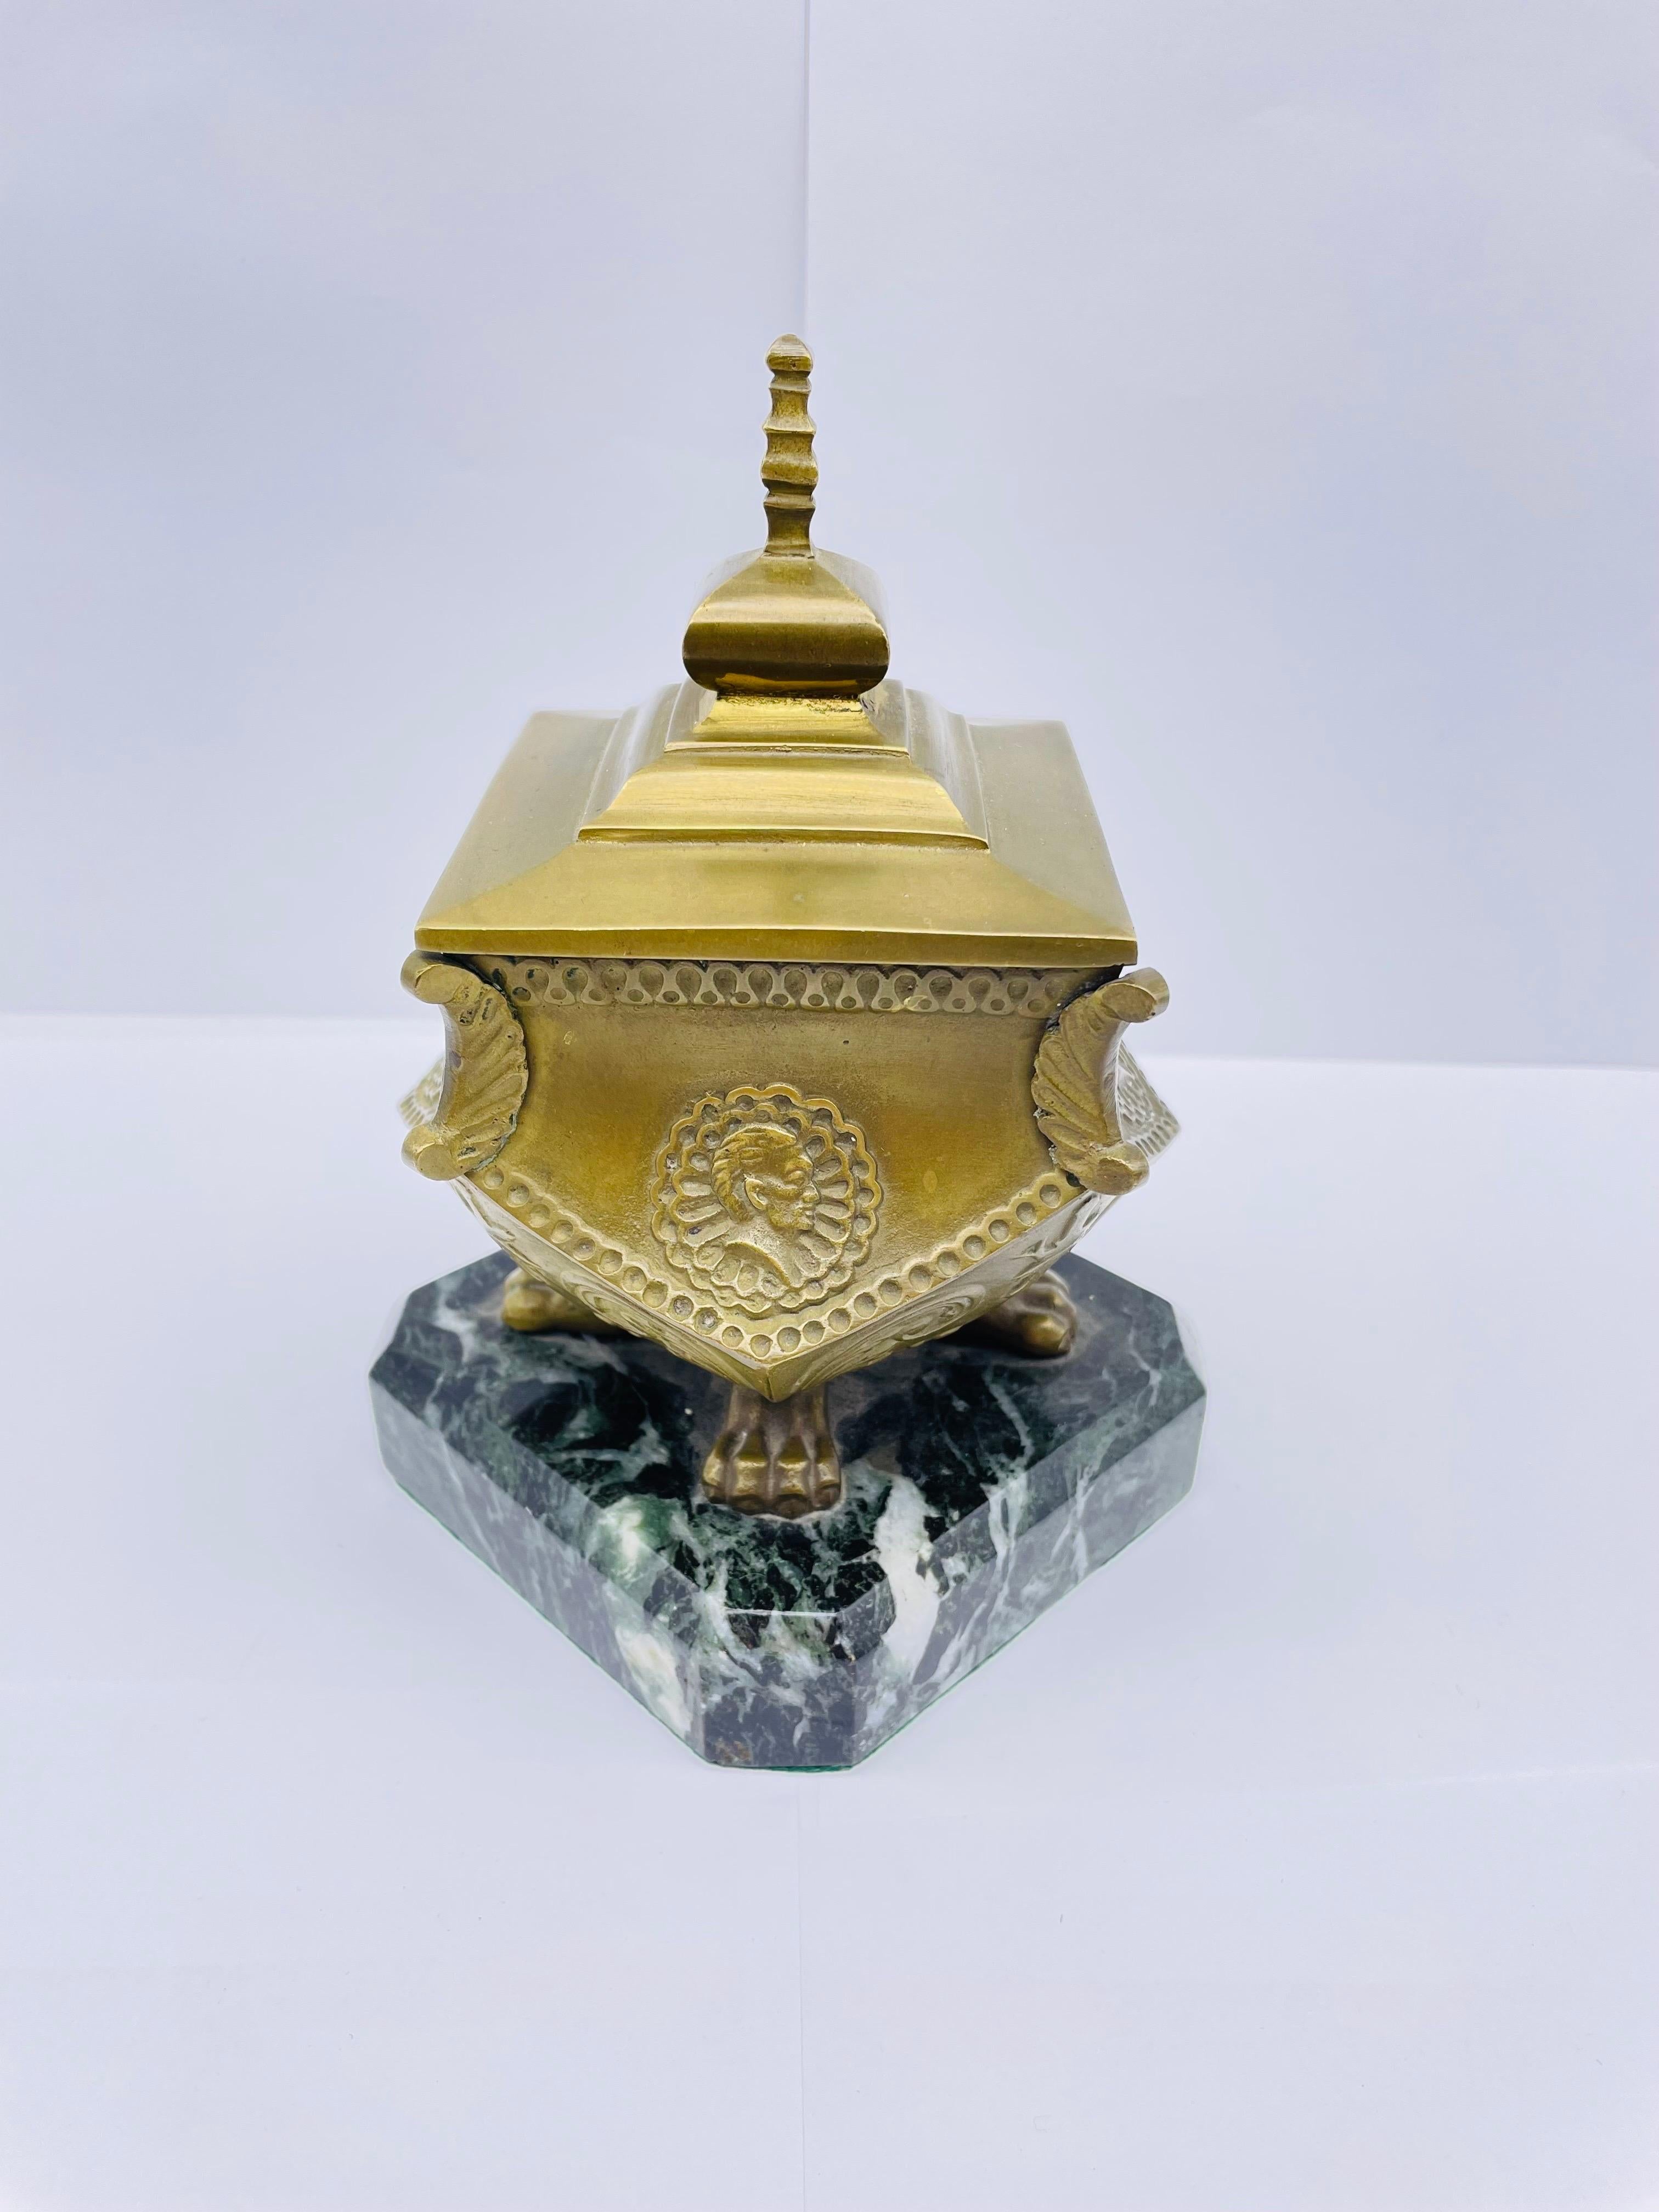 Stately antique brass bronze inkwell around 1880

Solid brass bronze inkwell with lid. Original glass insert.
Inkwell with paw feet standing on a square molded marble base.

Very noble and stately.